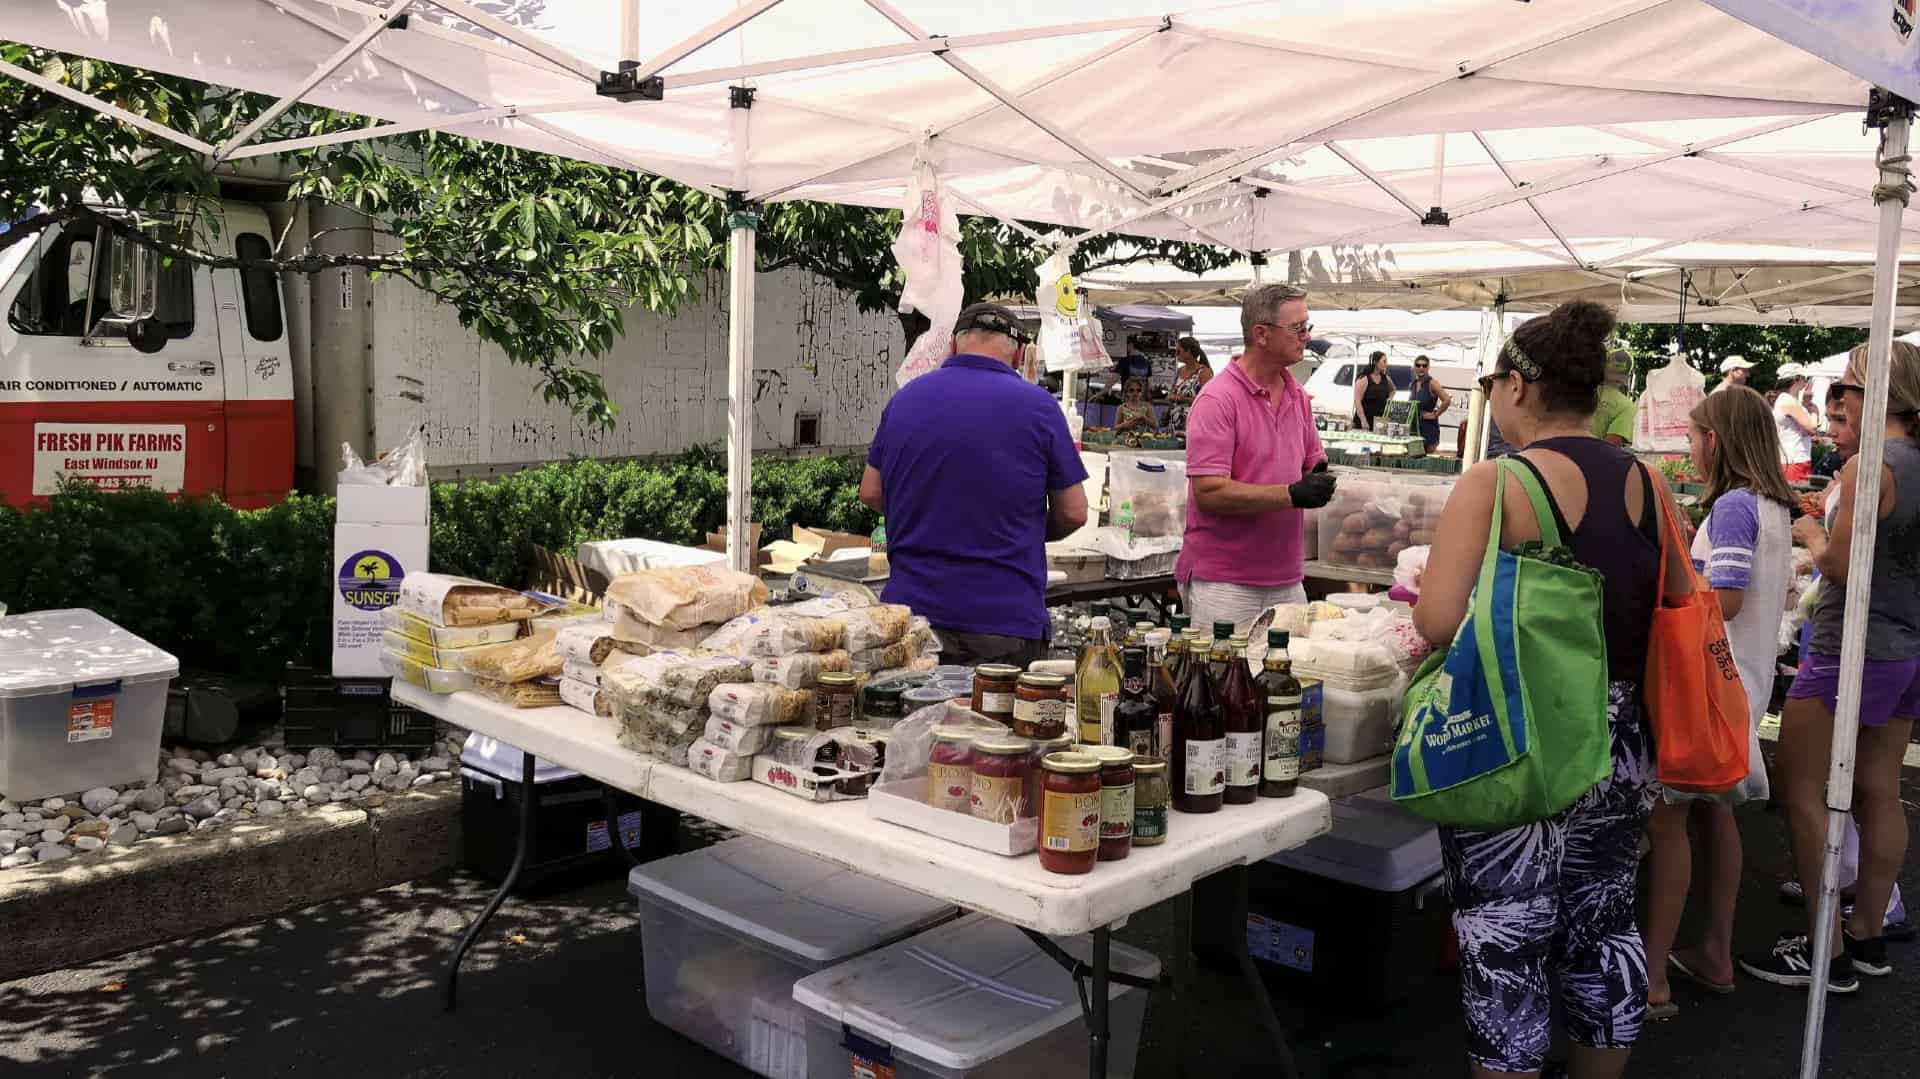 ellers and patrons at Galleria Red Bank Farmers Market